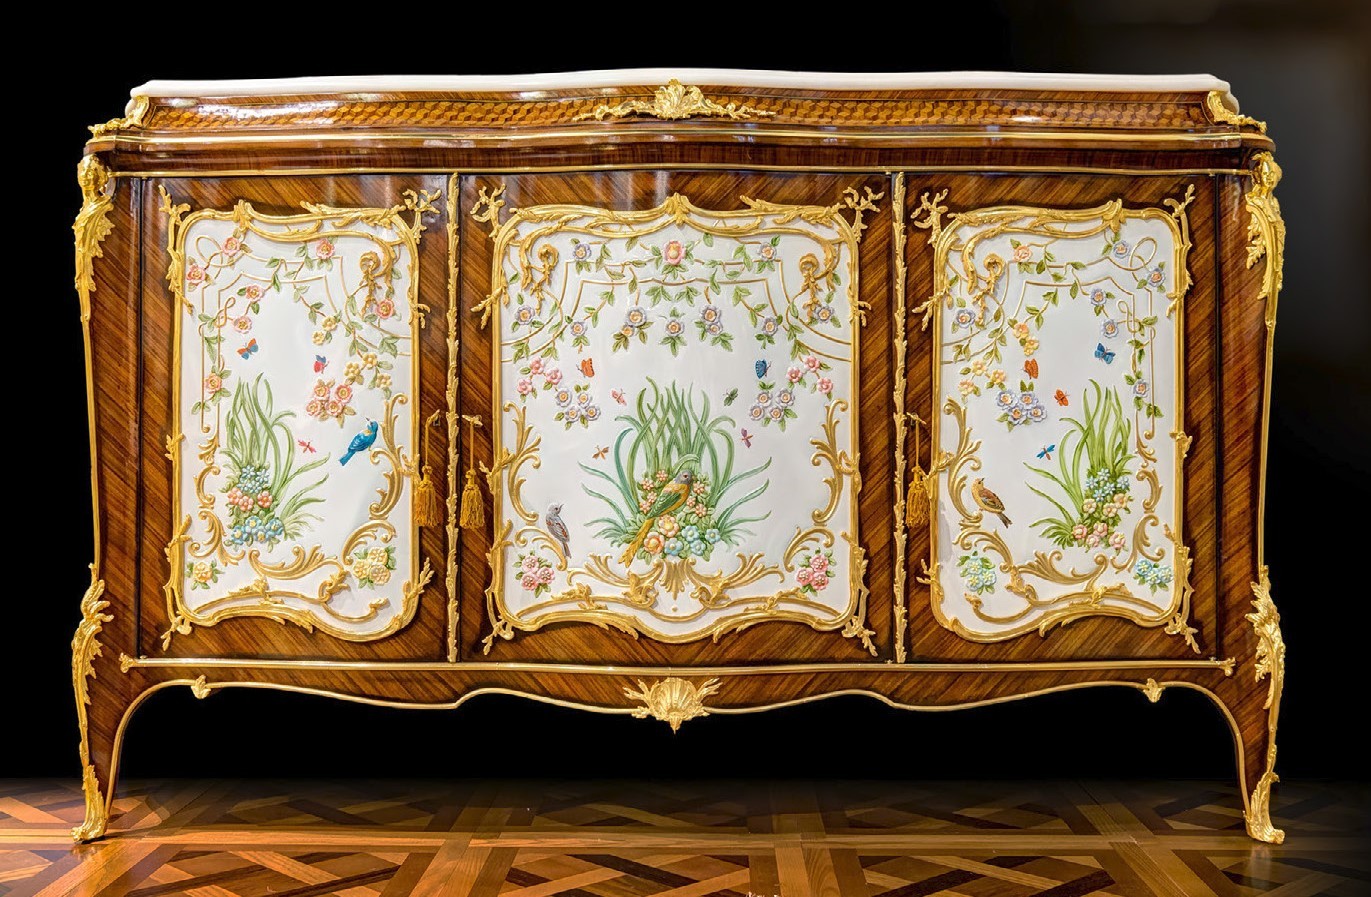 Breakfronts & China Cabinets Lovely Light Birds of Spring Entrace Dresser from our furniture showpiece collection. 7340